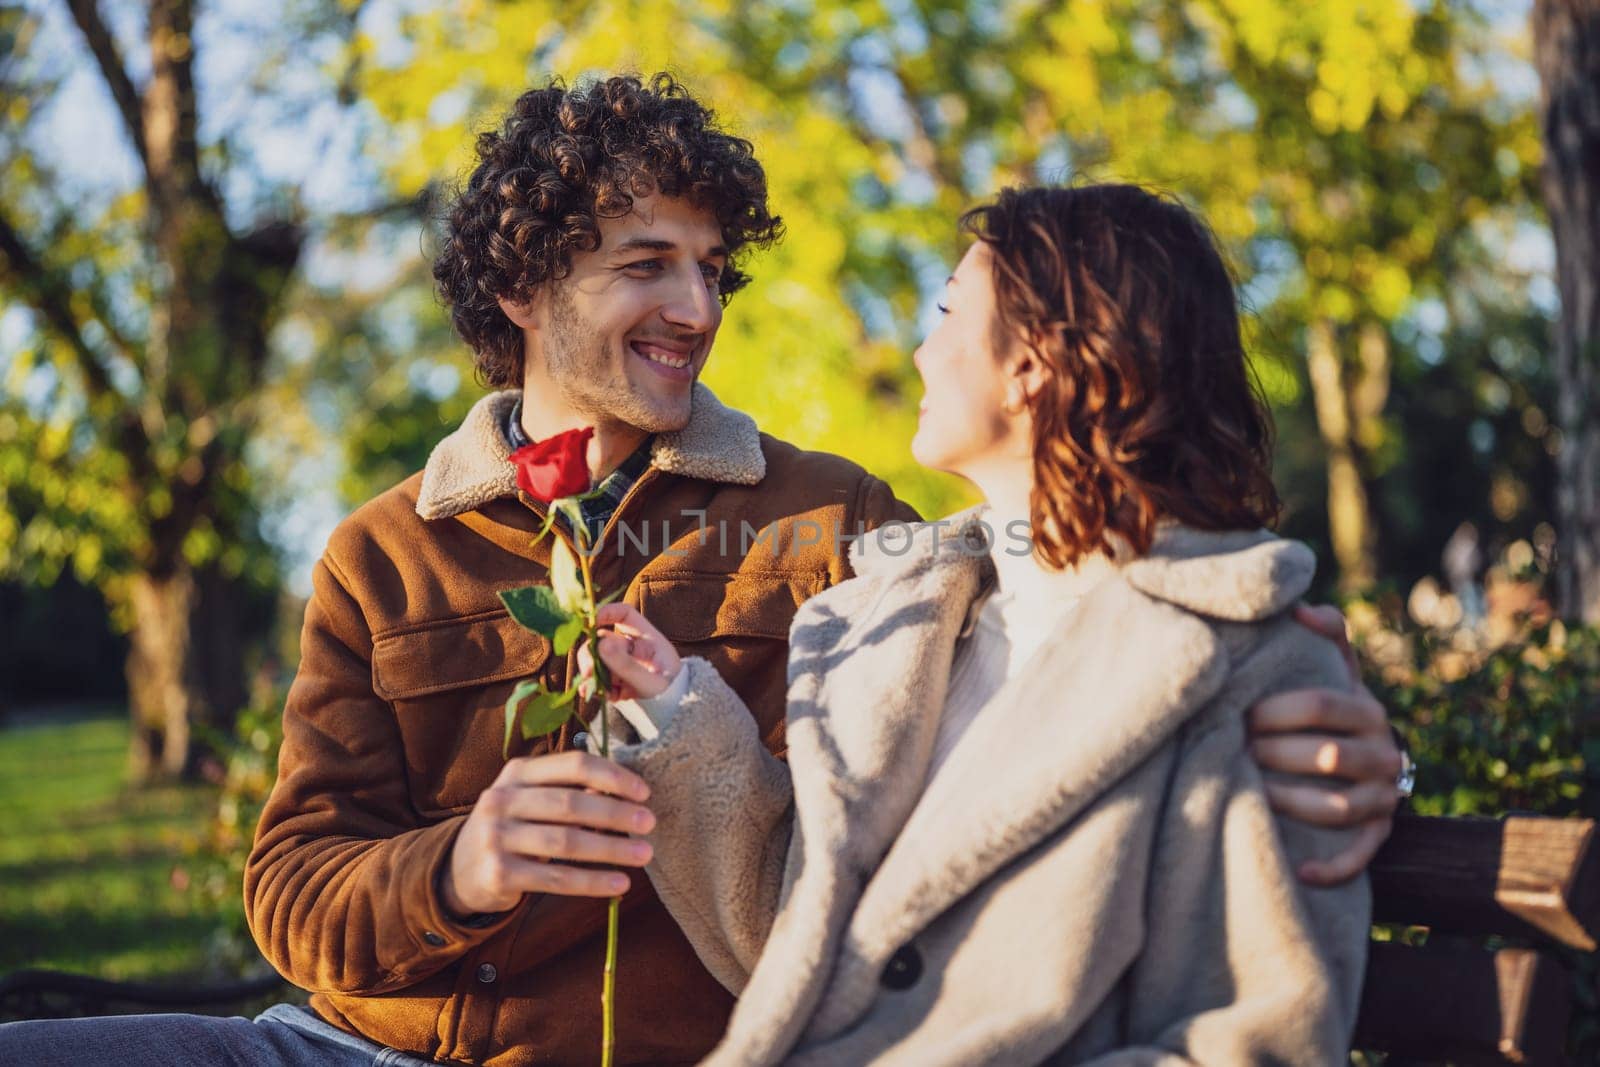 Portrait of happy loving couple in park. Man is giving rose to his woman.